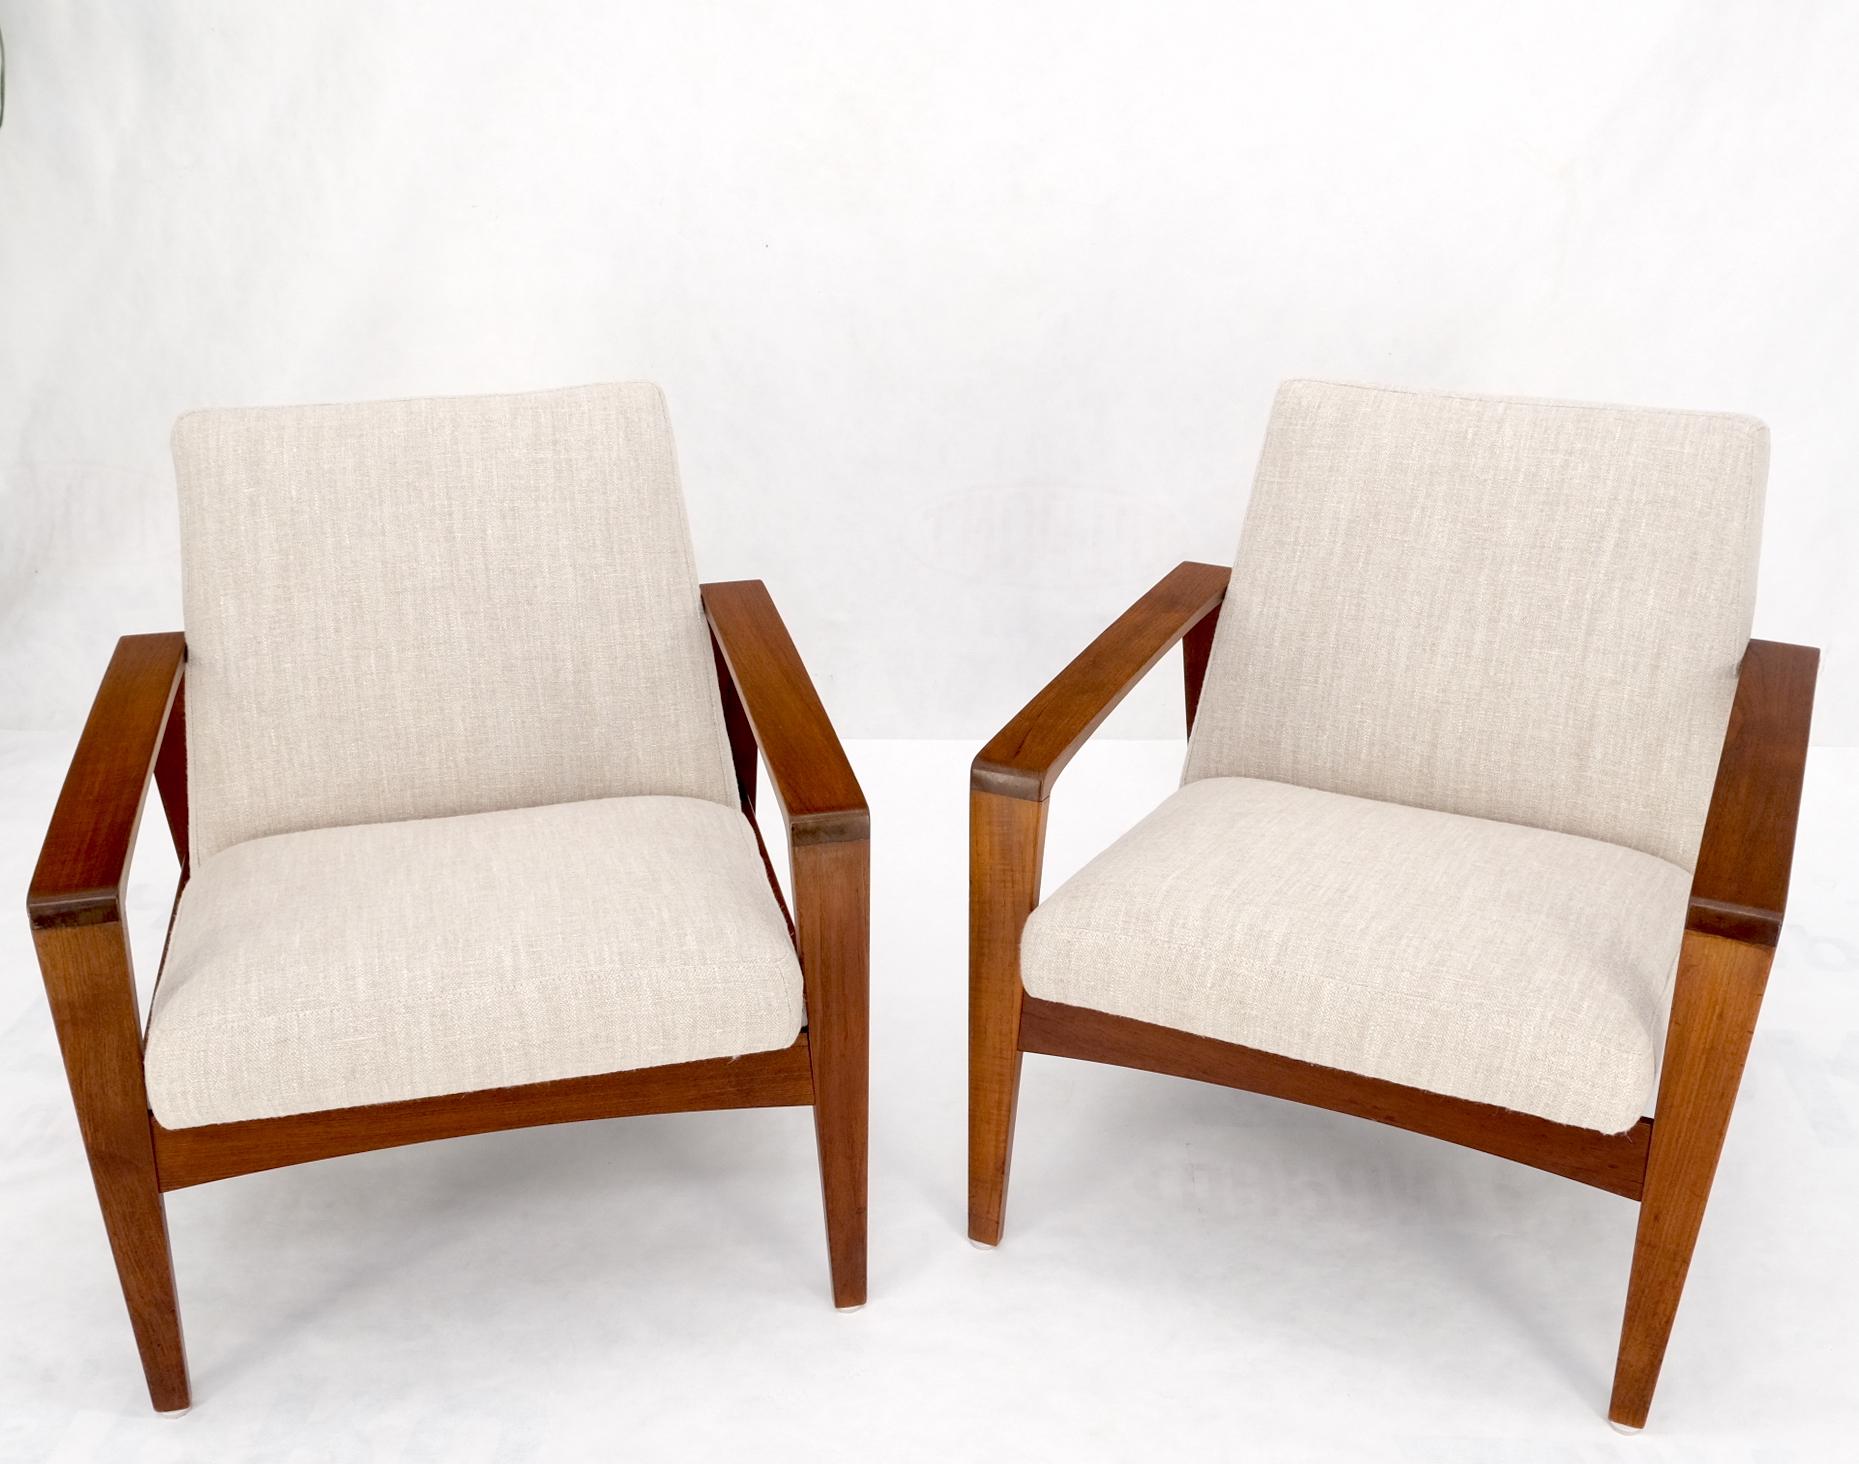 Pair Restored New Oatmeal Upholstery Teak Mid-Century Modern Lounge Arm Chairs For Sale 10